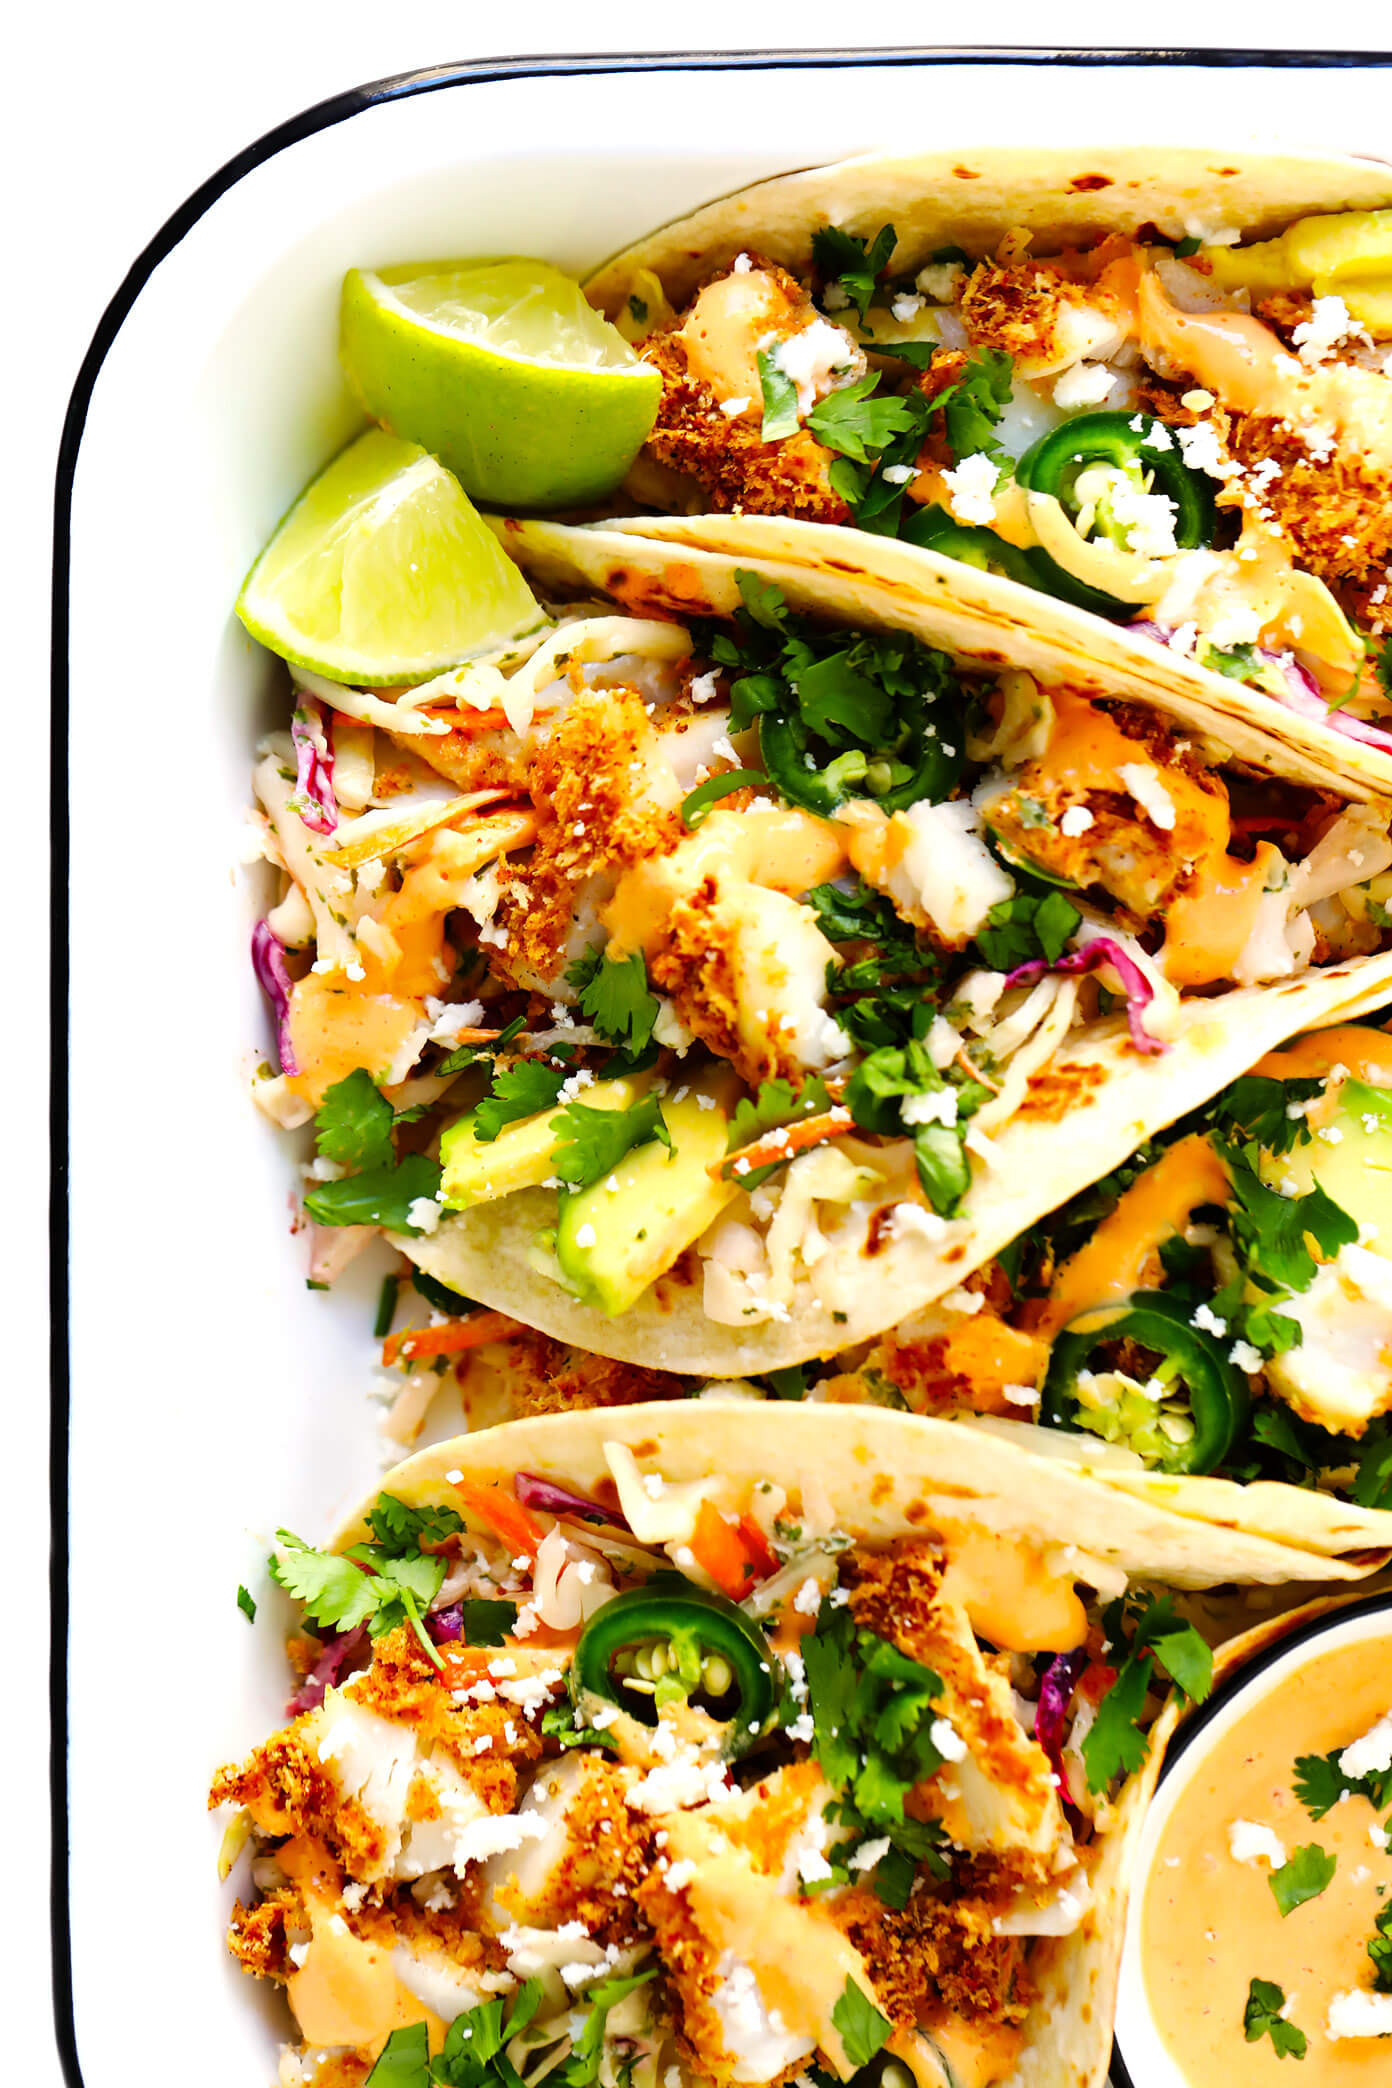 Recipes For Fish Taco Sauce
 Life Changing Crispy Baked Fish Tacos Cravings Happen